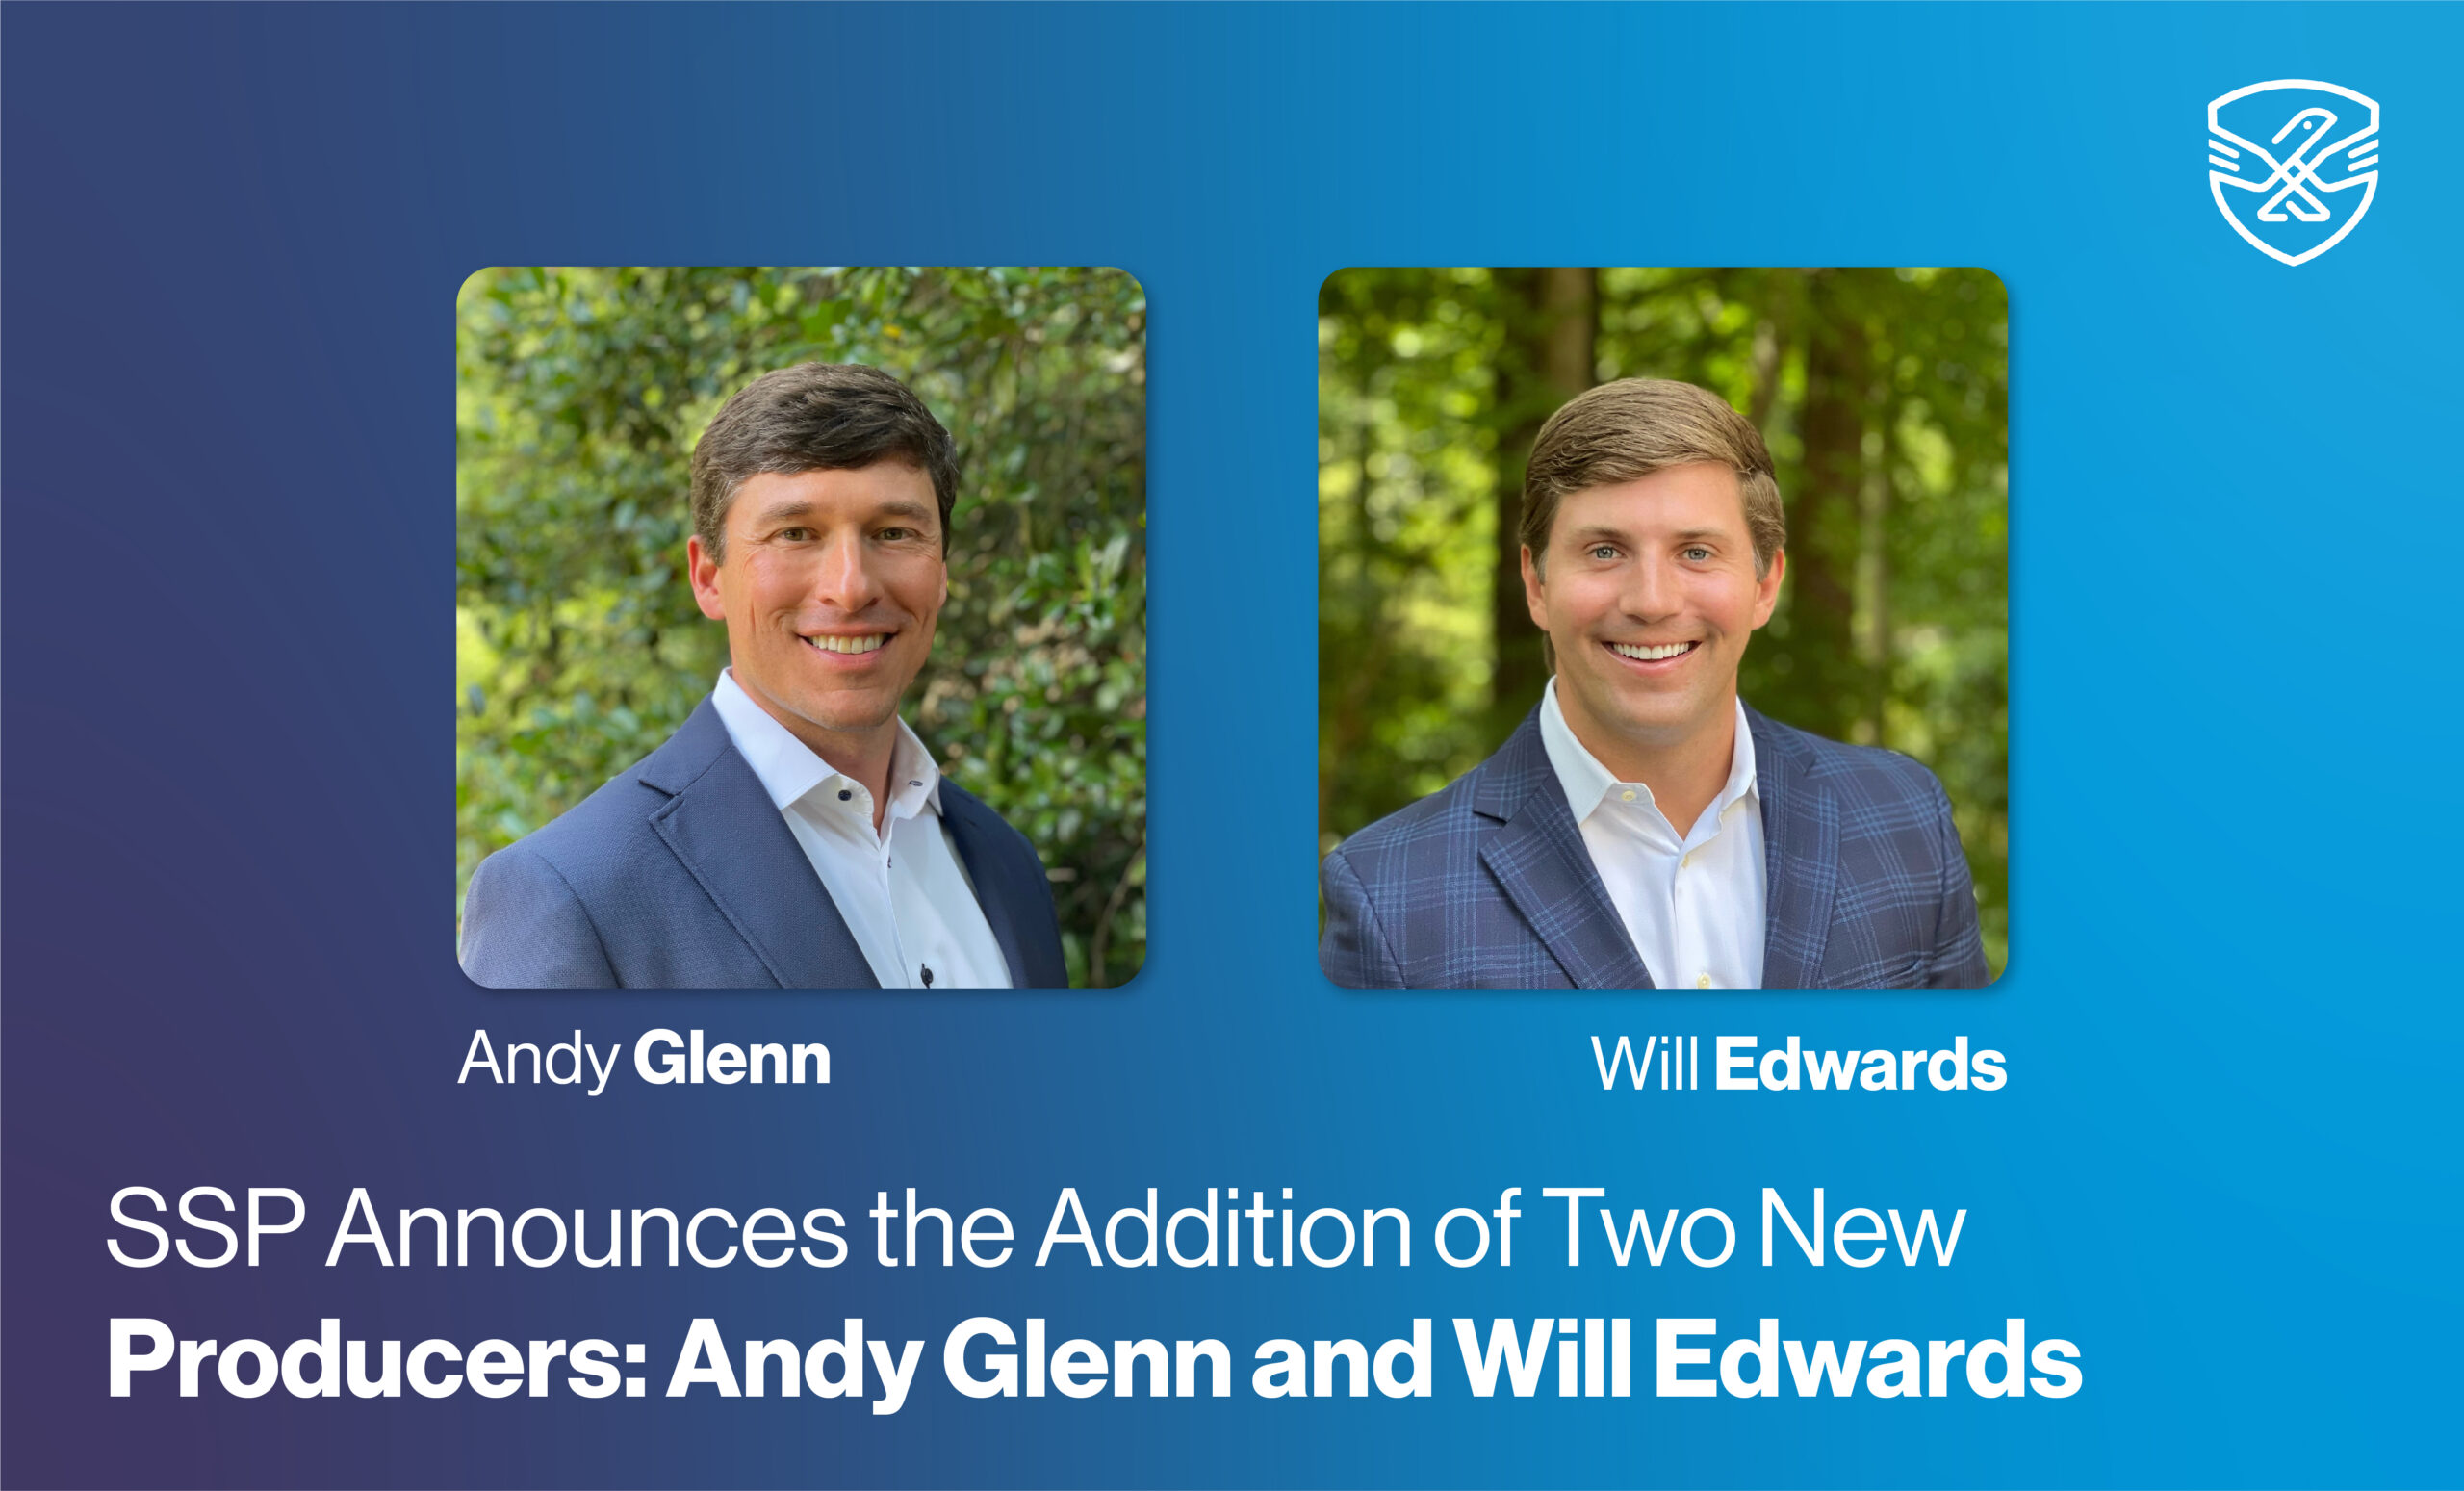 SSP Announces the Addition of Two New Producers: Andy Glenna and Will Edwards